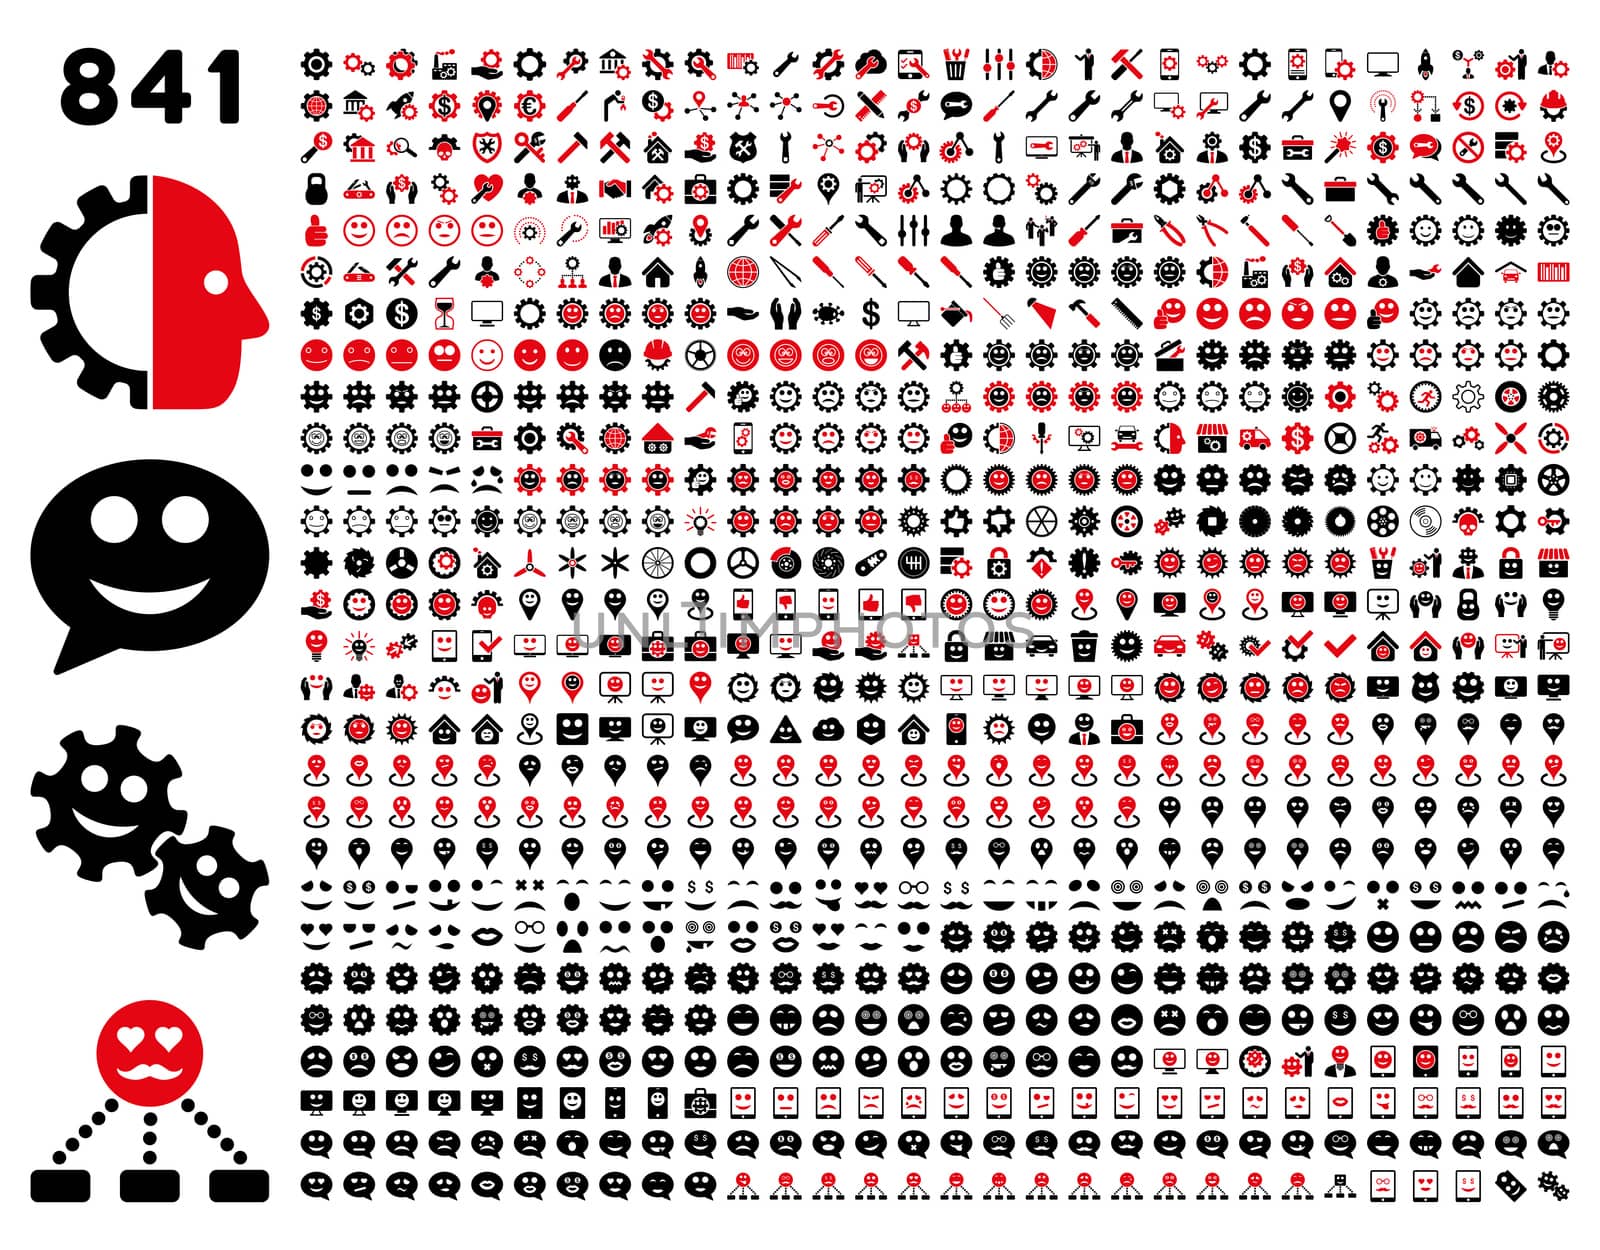 841 smile, tool, gear, map markers, mobile icons. Glyph set style: bicolor flat images, intensive red and black symbols, isolated on a white background.